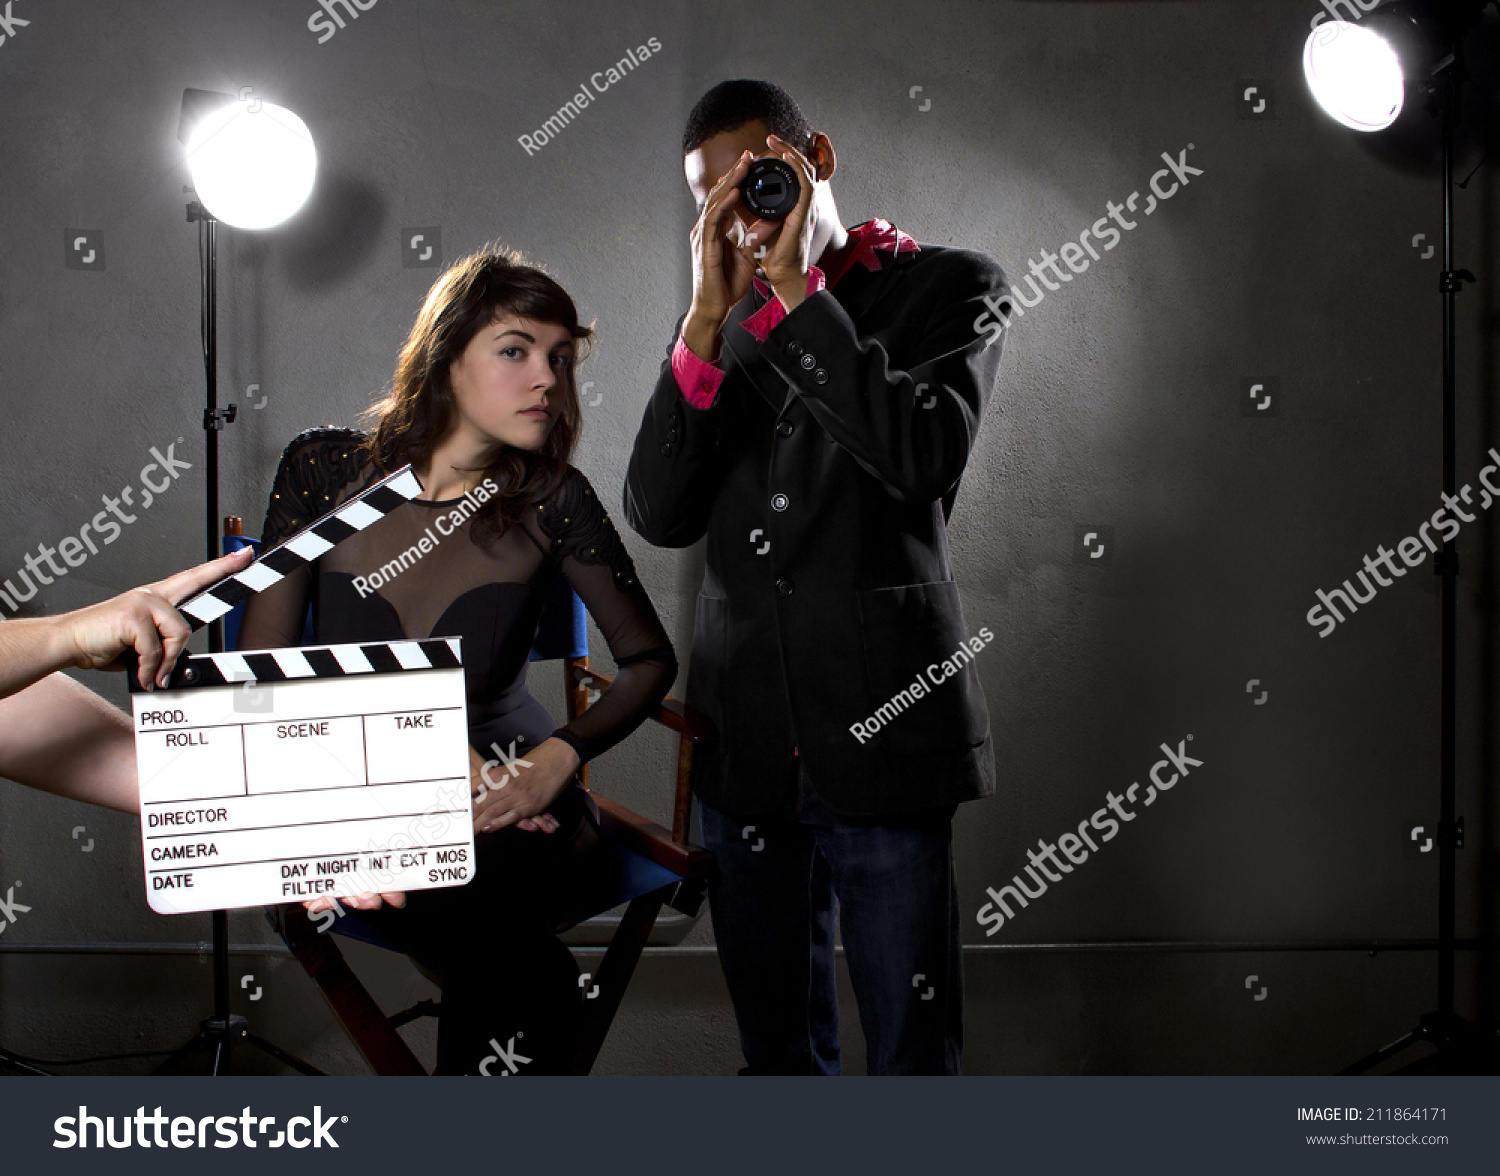 Hollywood film industry producers or directors in a sound stage #211864171